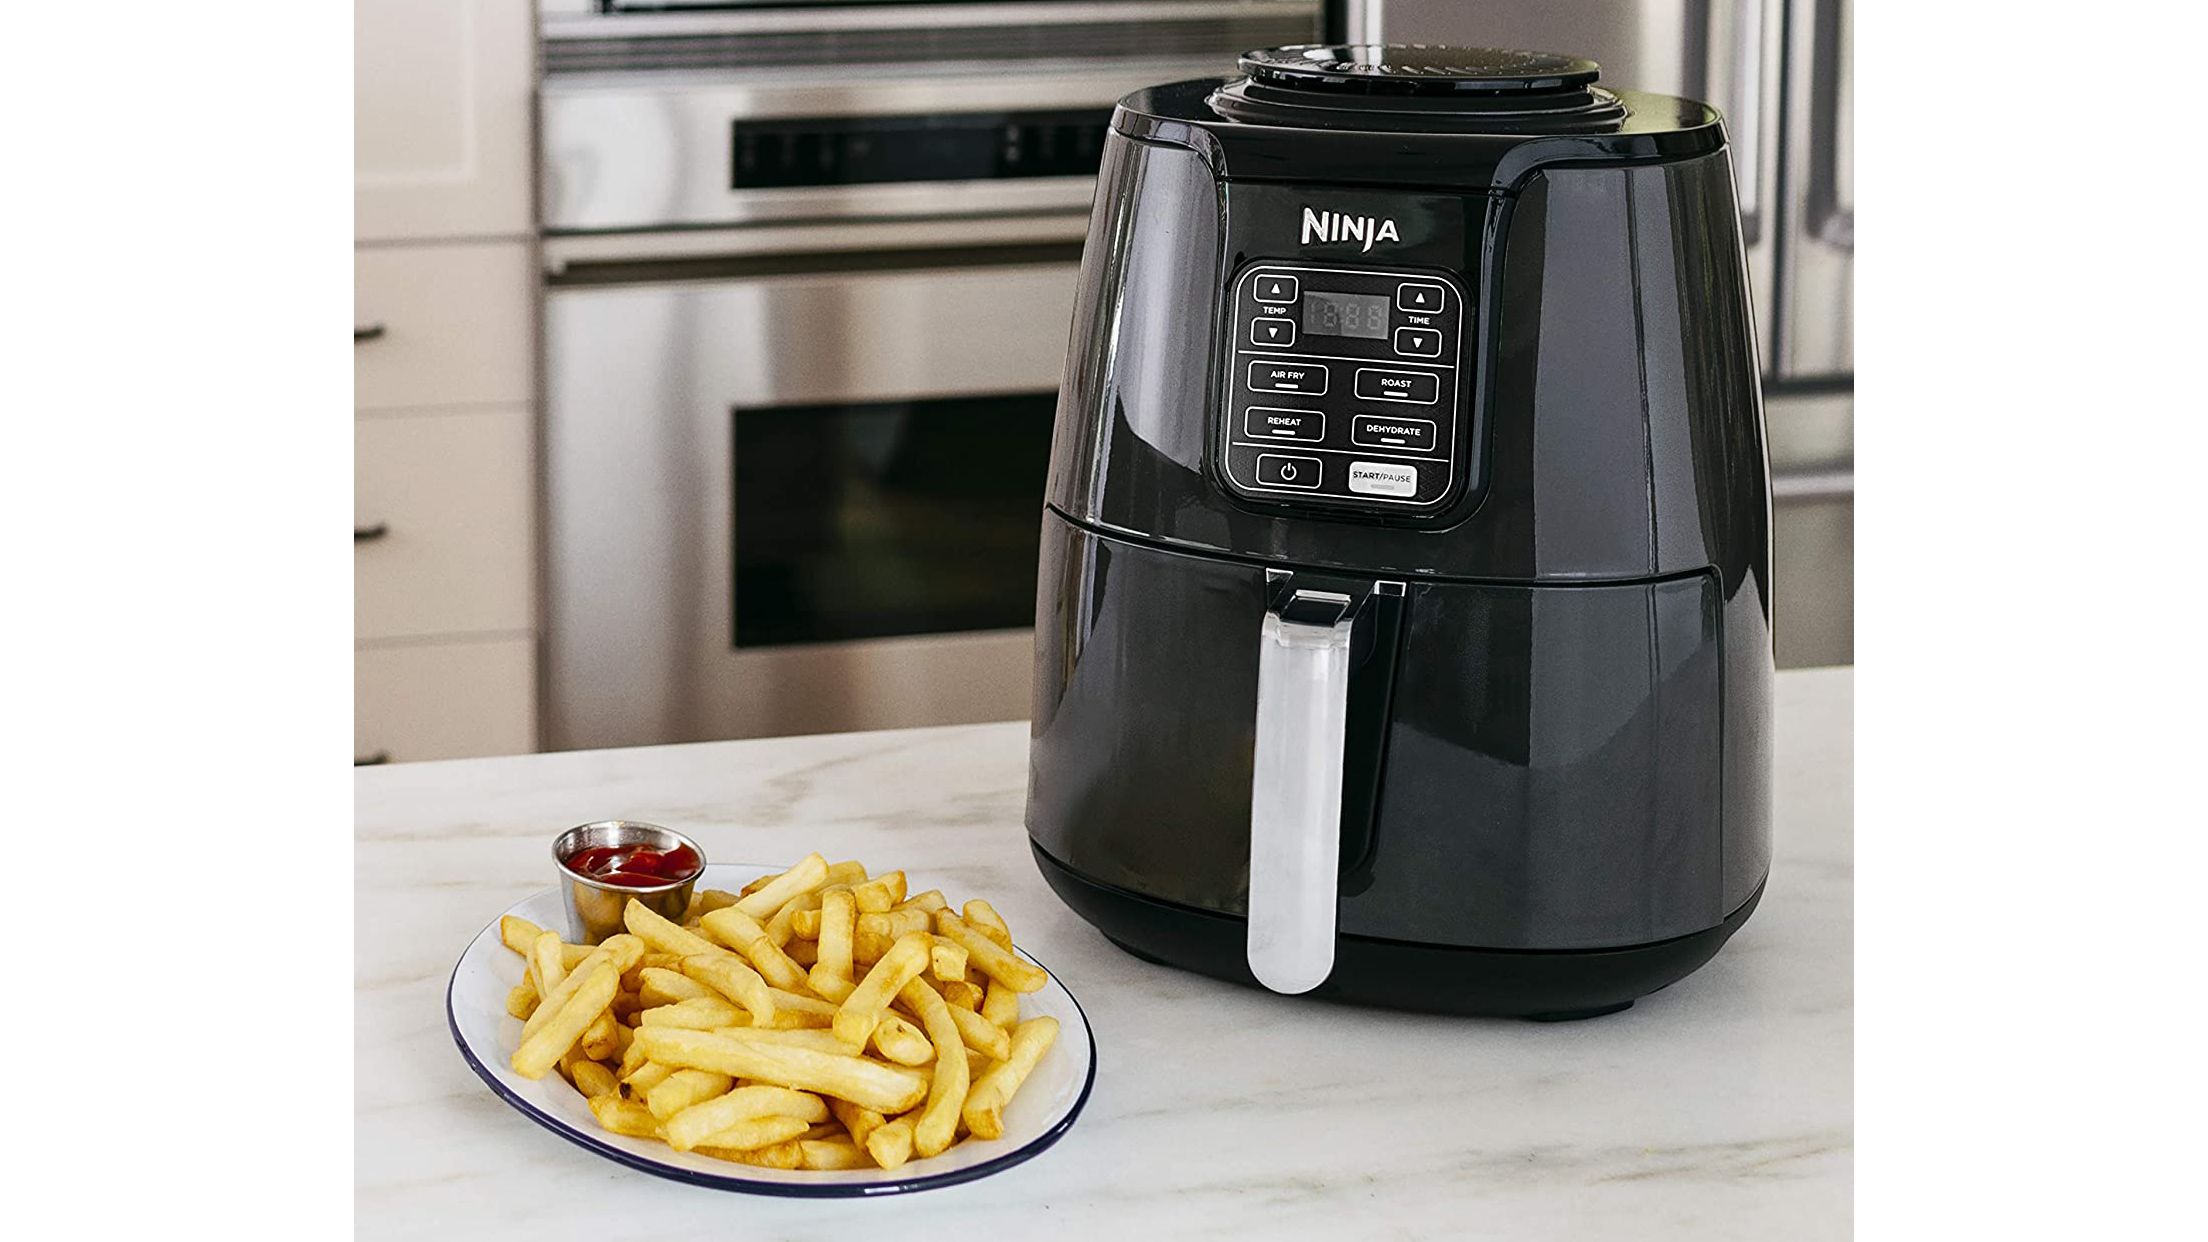 The 28 best appliance deals from the Prime Early Access Sale